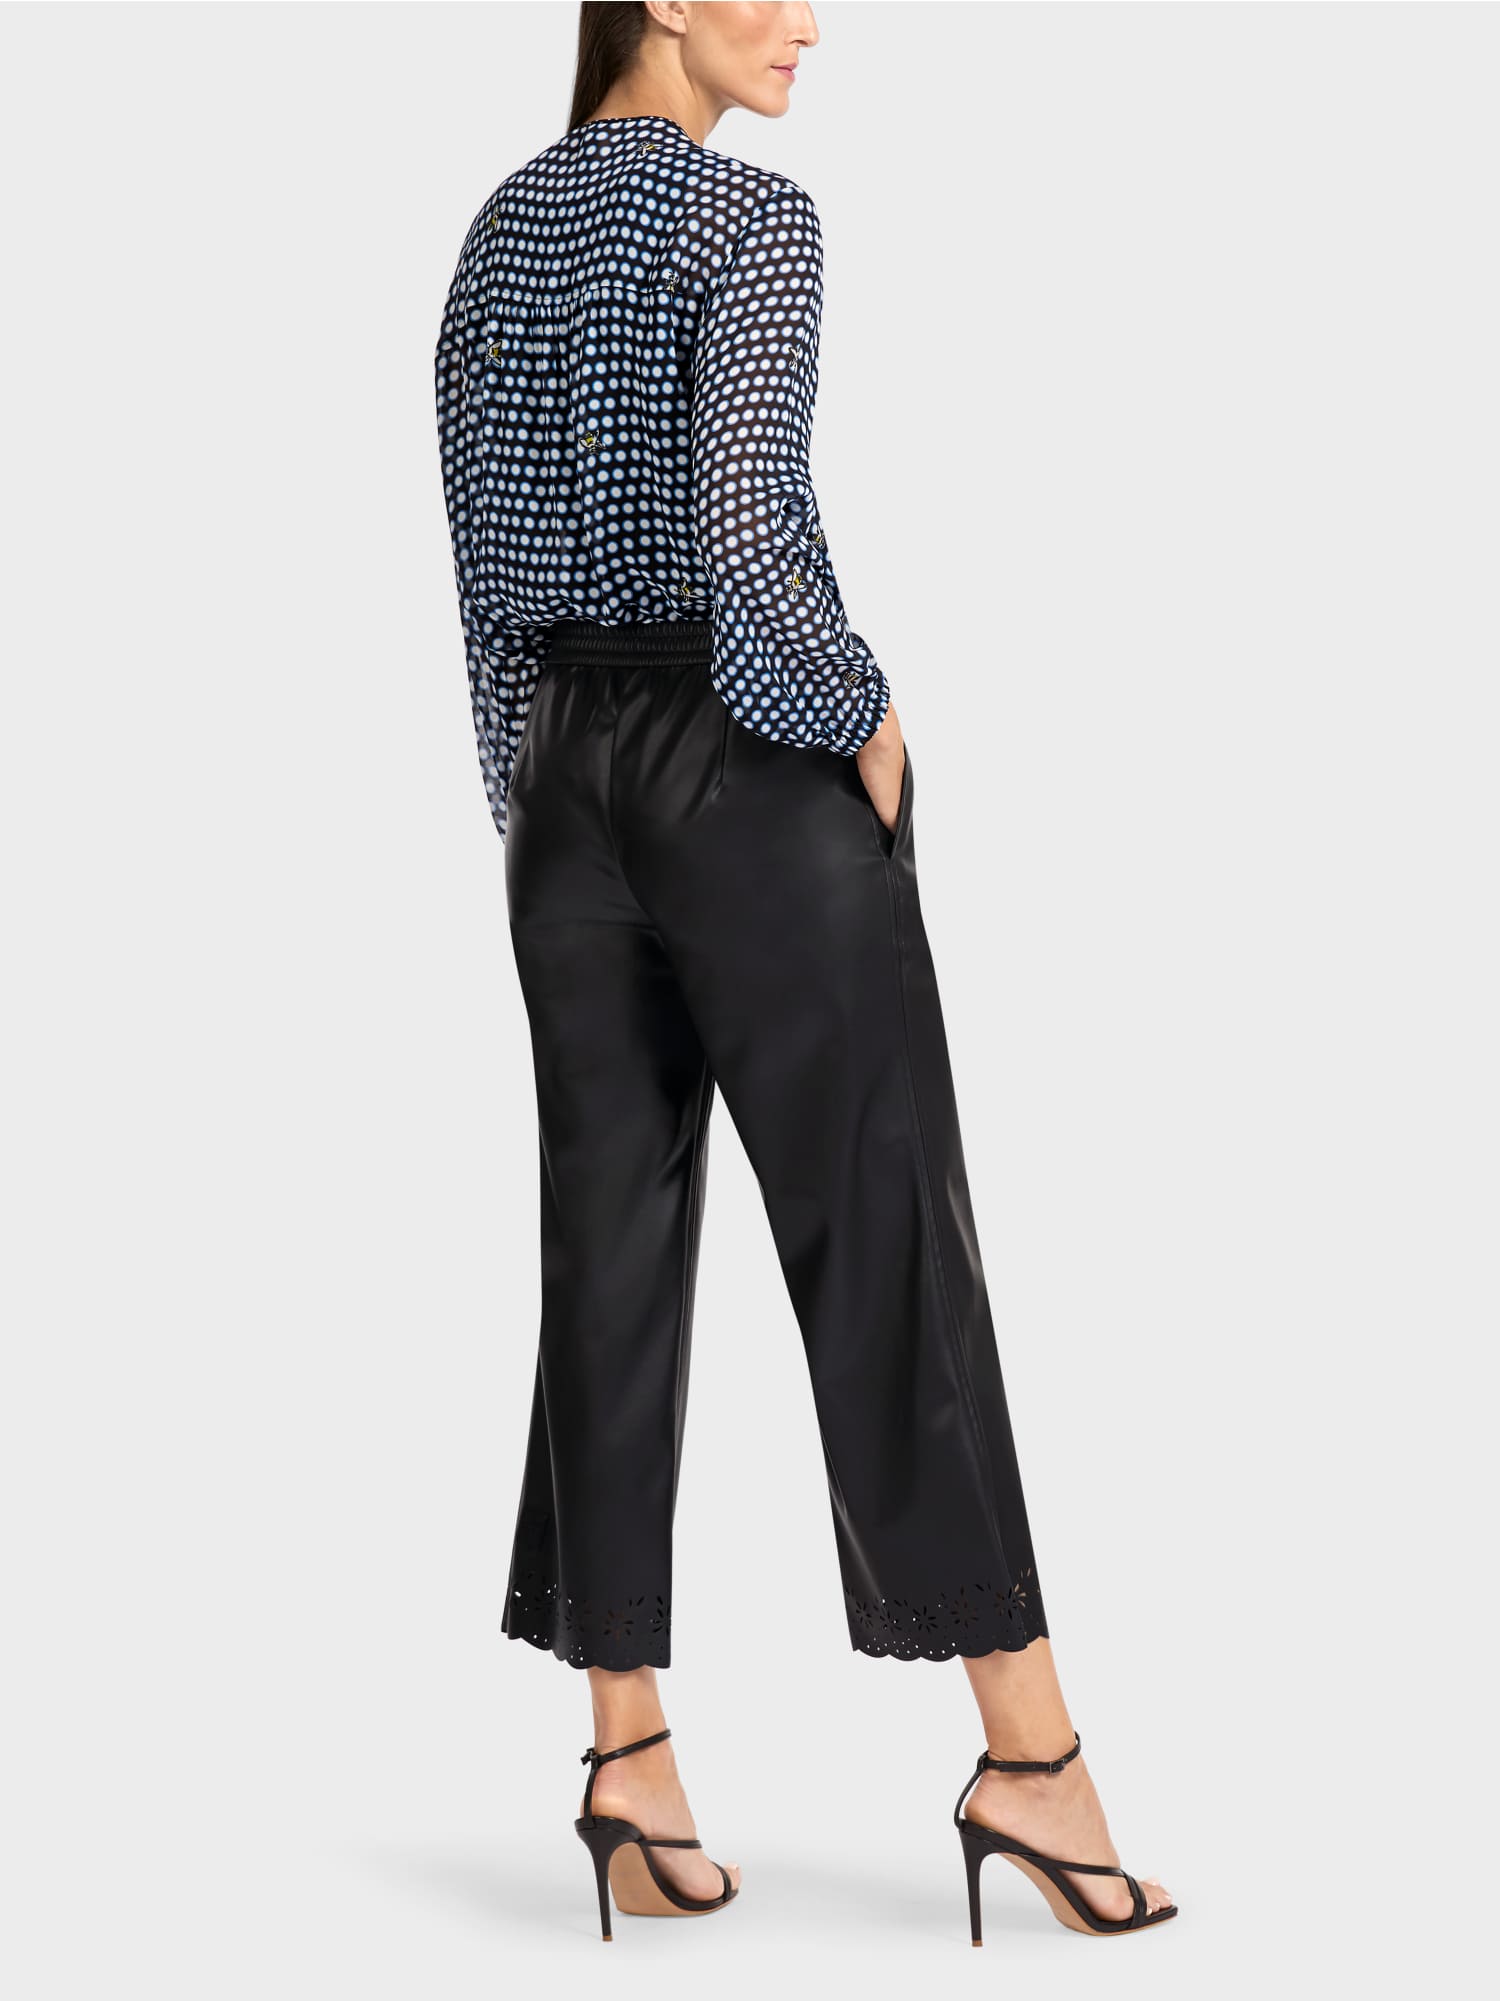 Marc Cain Sport pants in faux leather